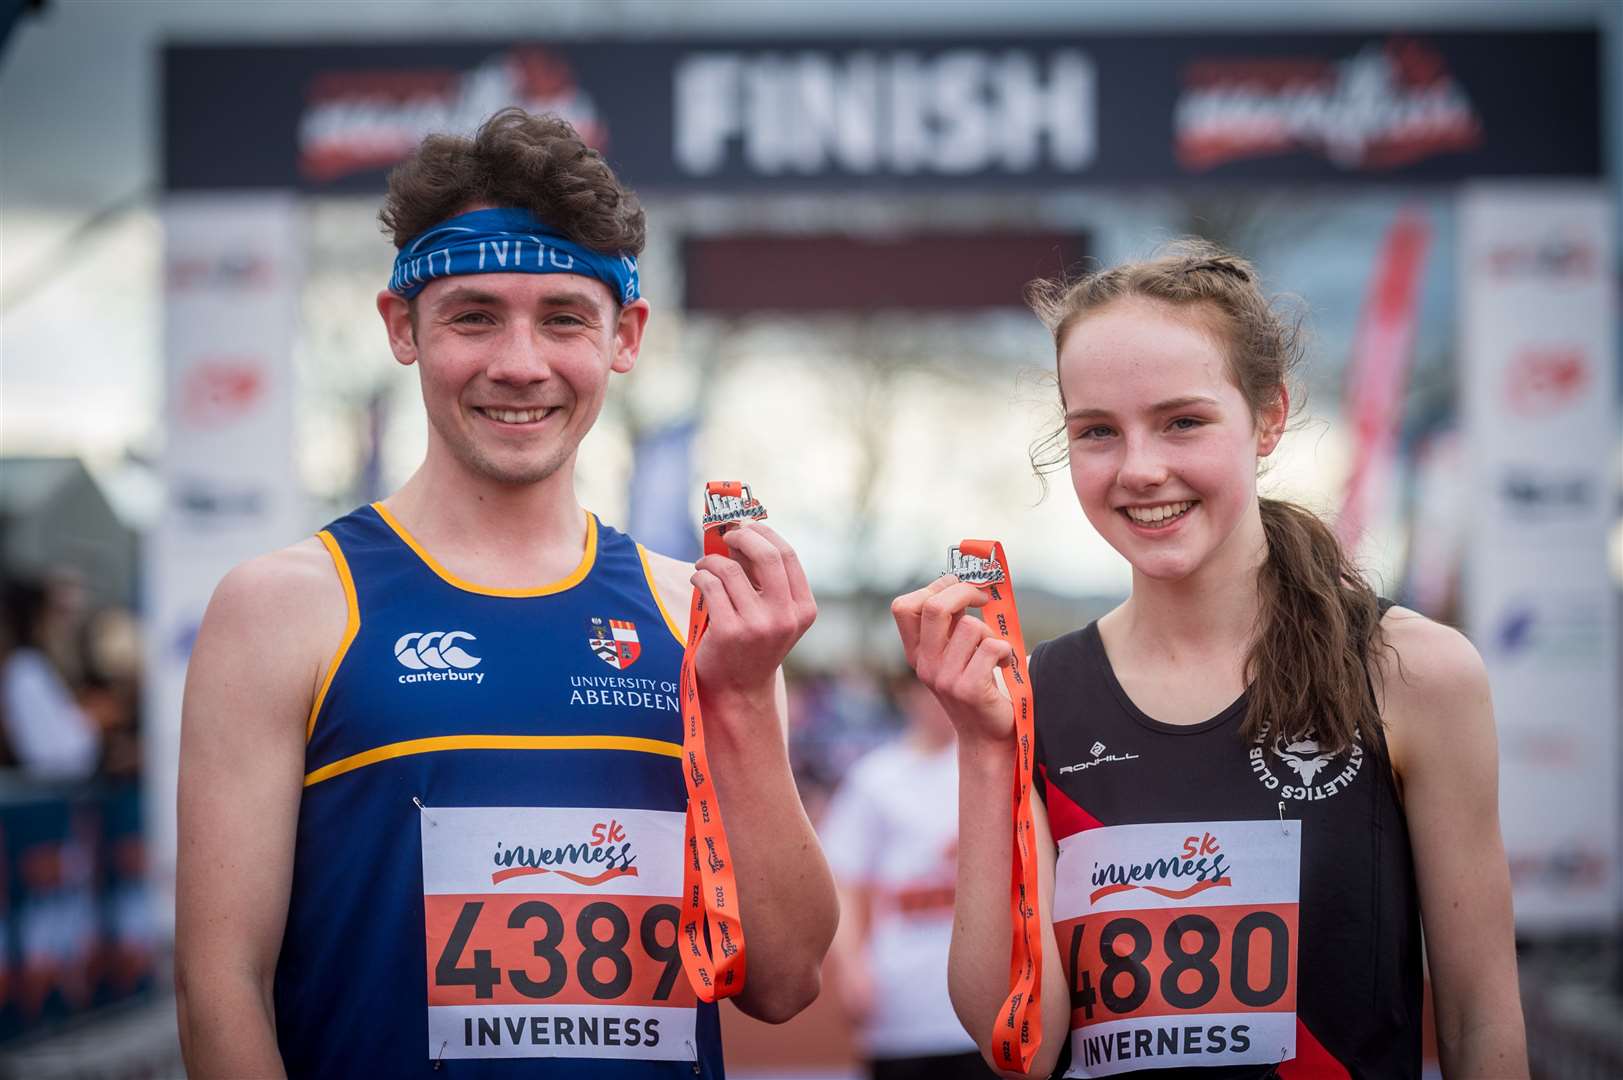 Luke Nelson of University of Aberdeen Athletics Club and Caitlyn Heggie of Ross County Athletics Club were men's and women's titles at Inverness 5K. Picture: Callum Mackay